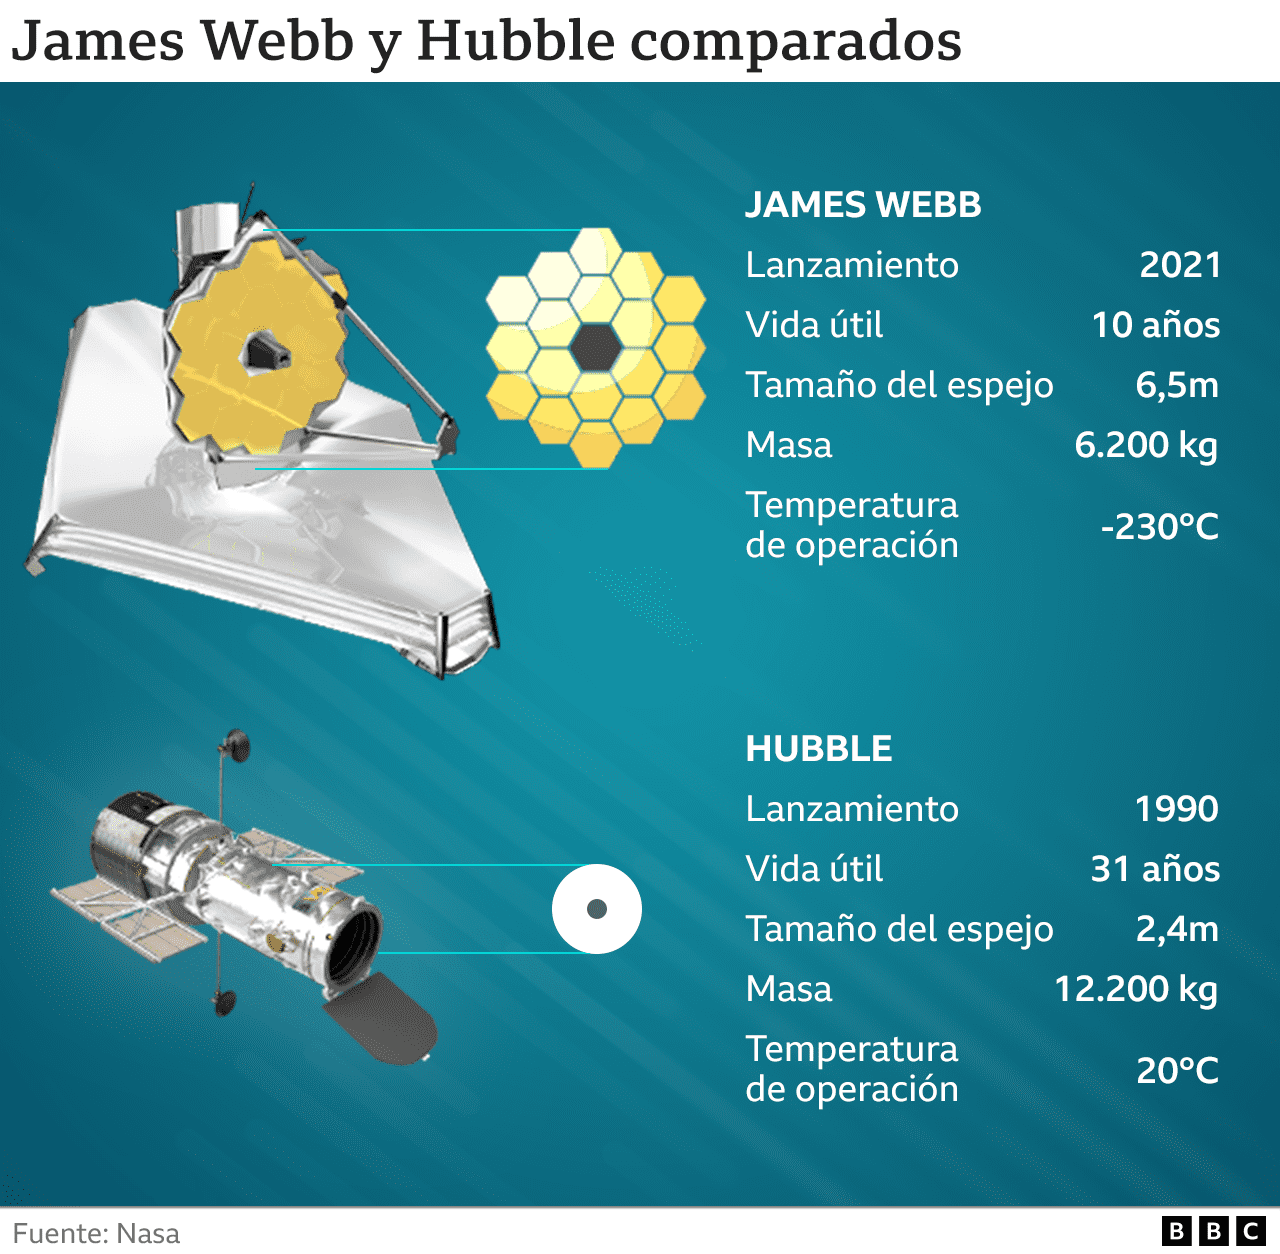 Comparison chart between Webb and Hubble